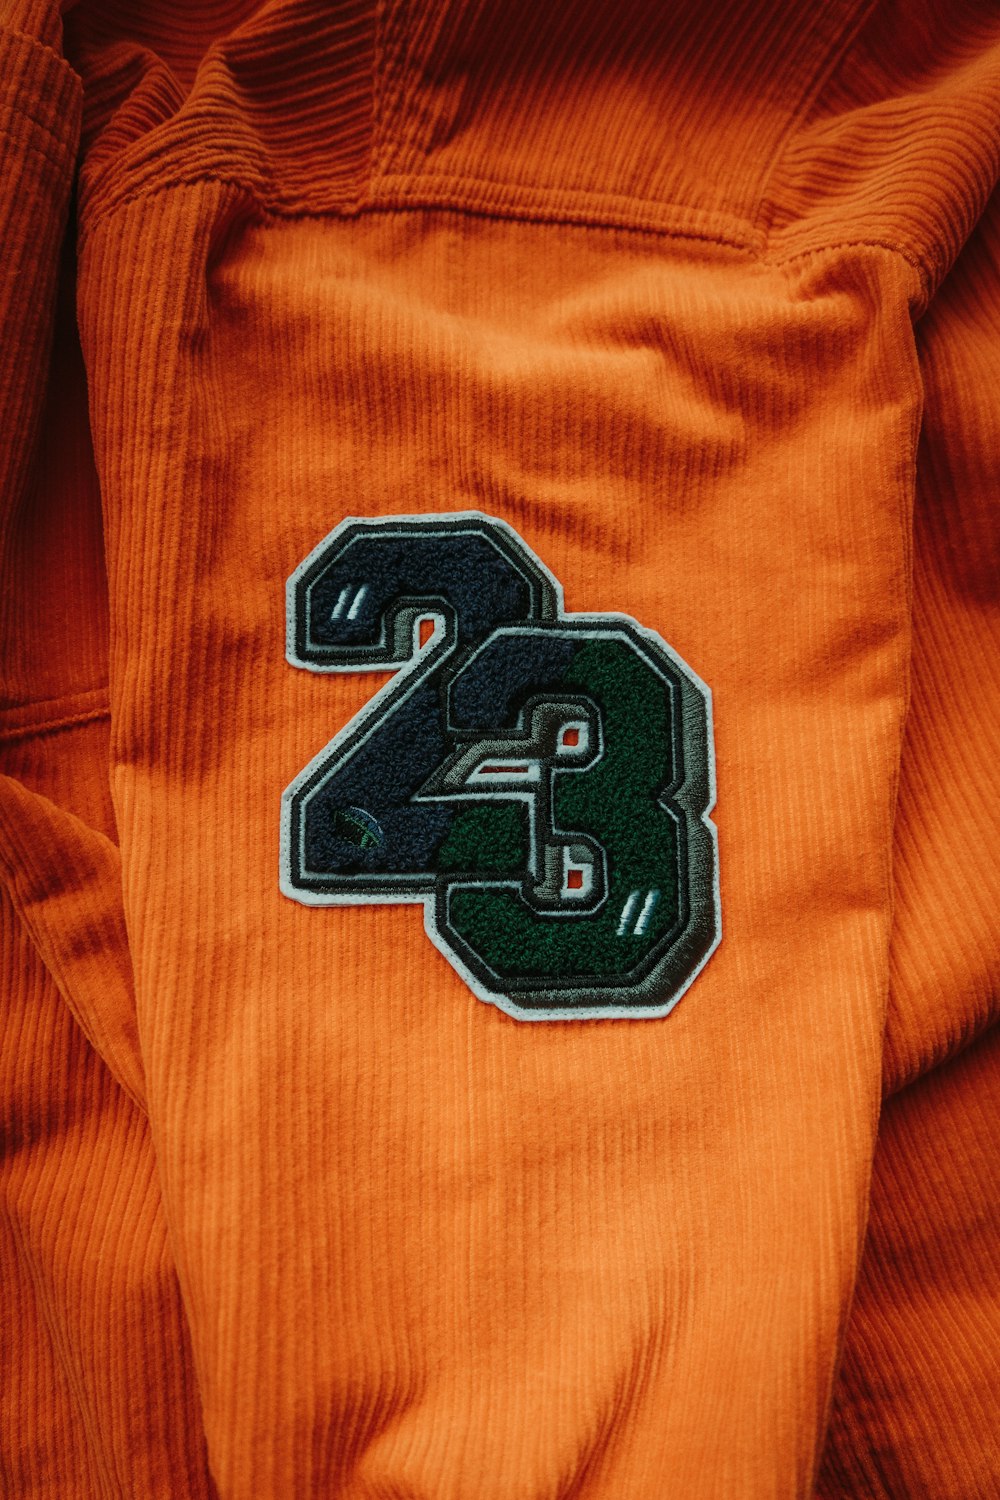 a close up of a person wearing an orange jacket